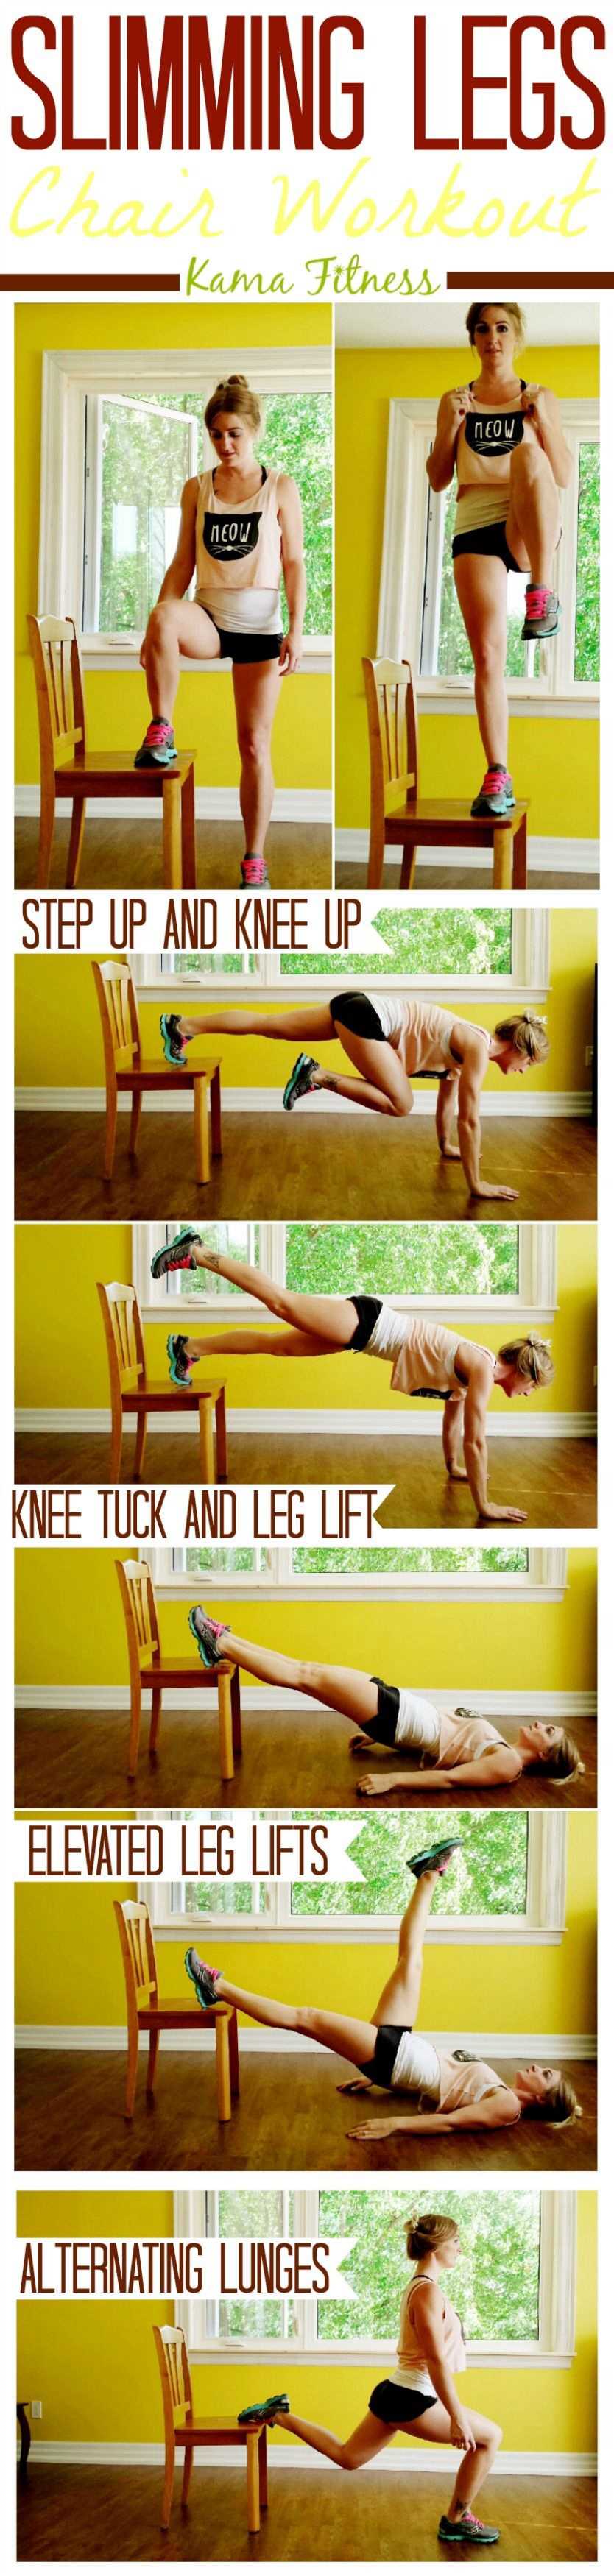 Slimming Legs Chair Workout